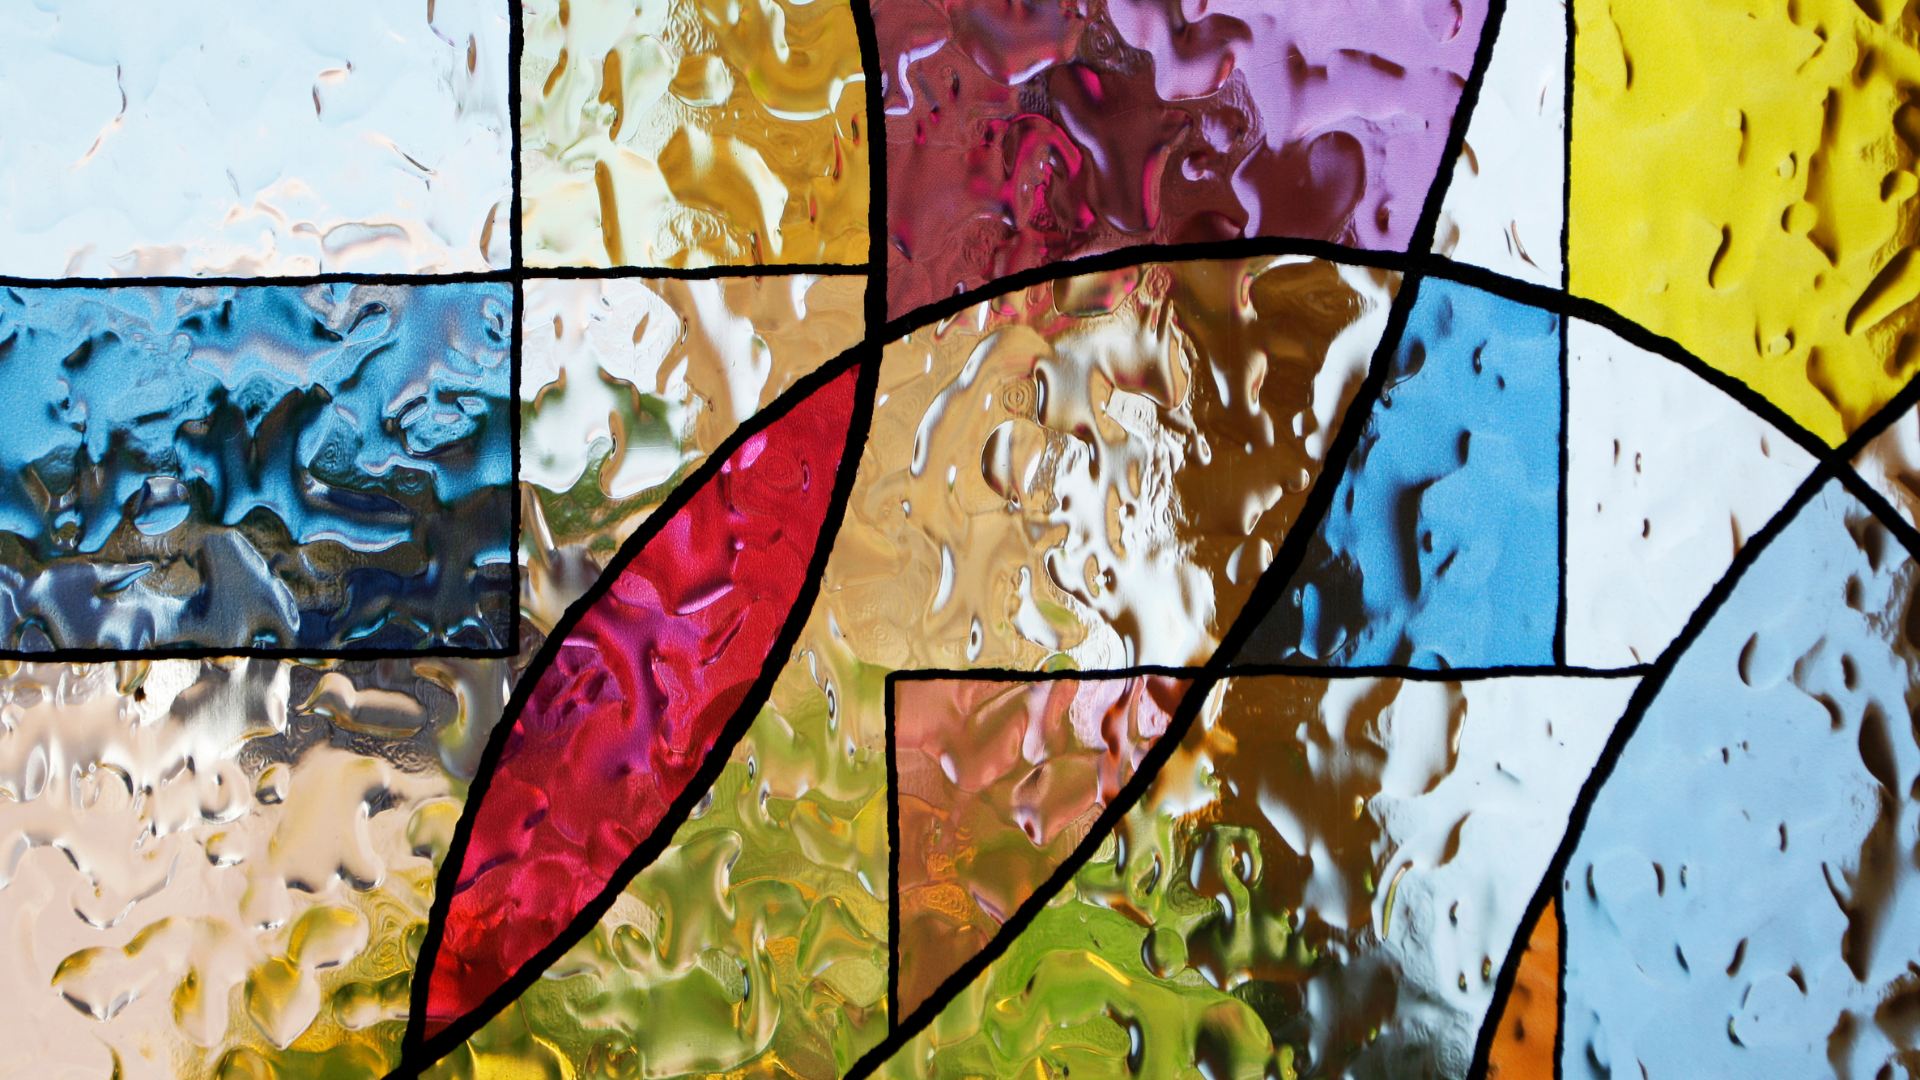 How Do You Stain Glass?